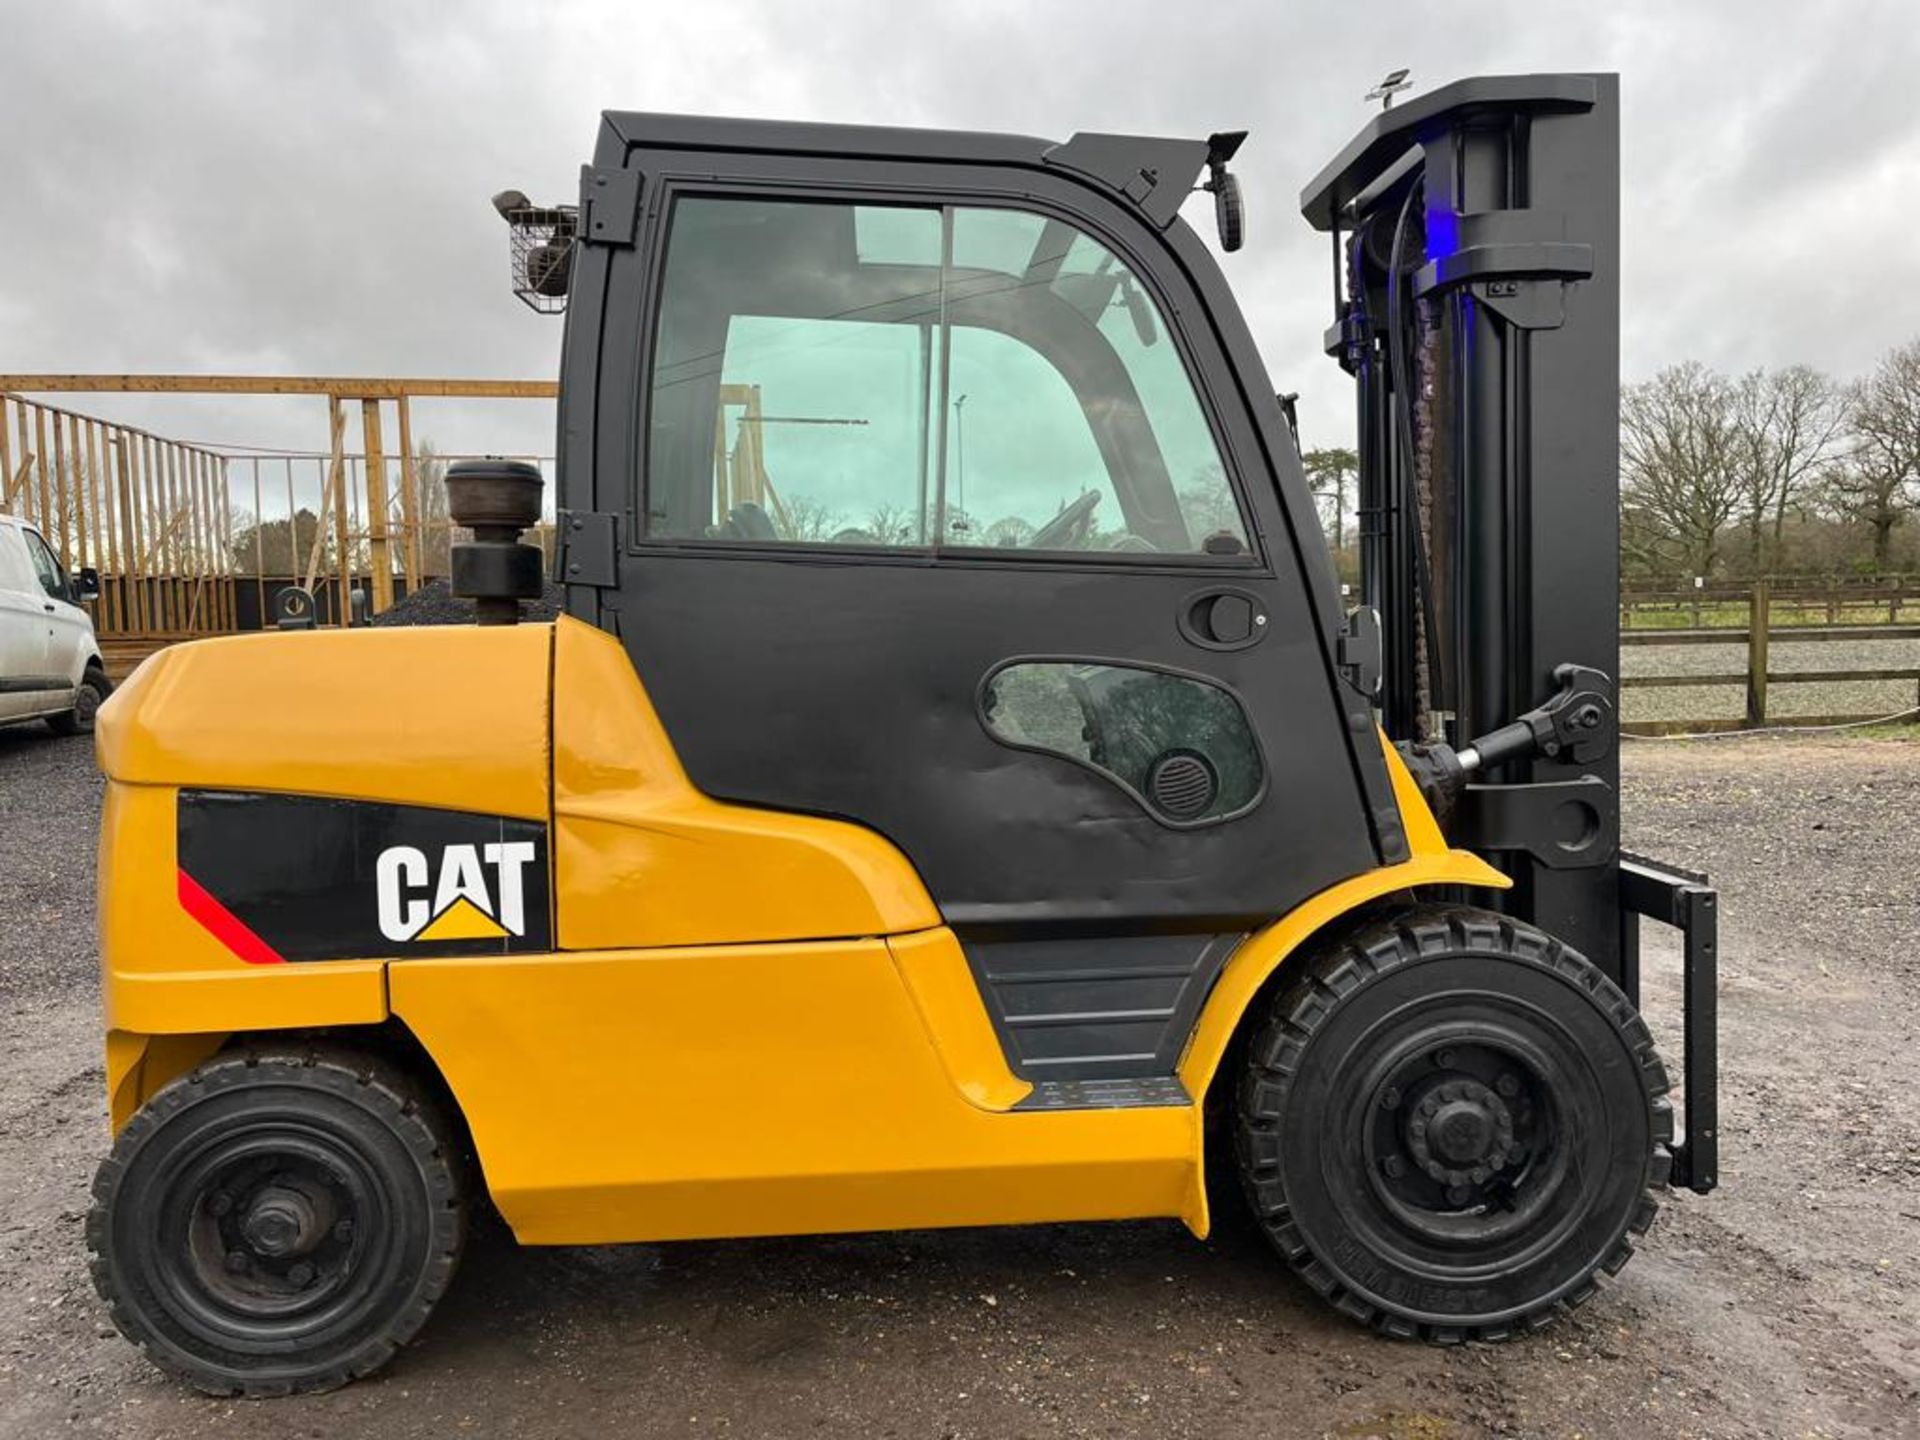 2013 - CATERPILLAR, 5 Tonne Diesel Forklift (New Front Tyres) - Image 7 of 10